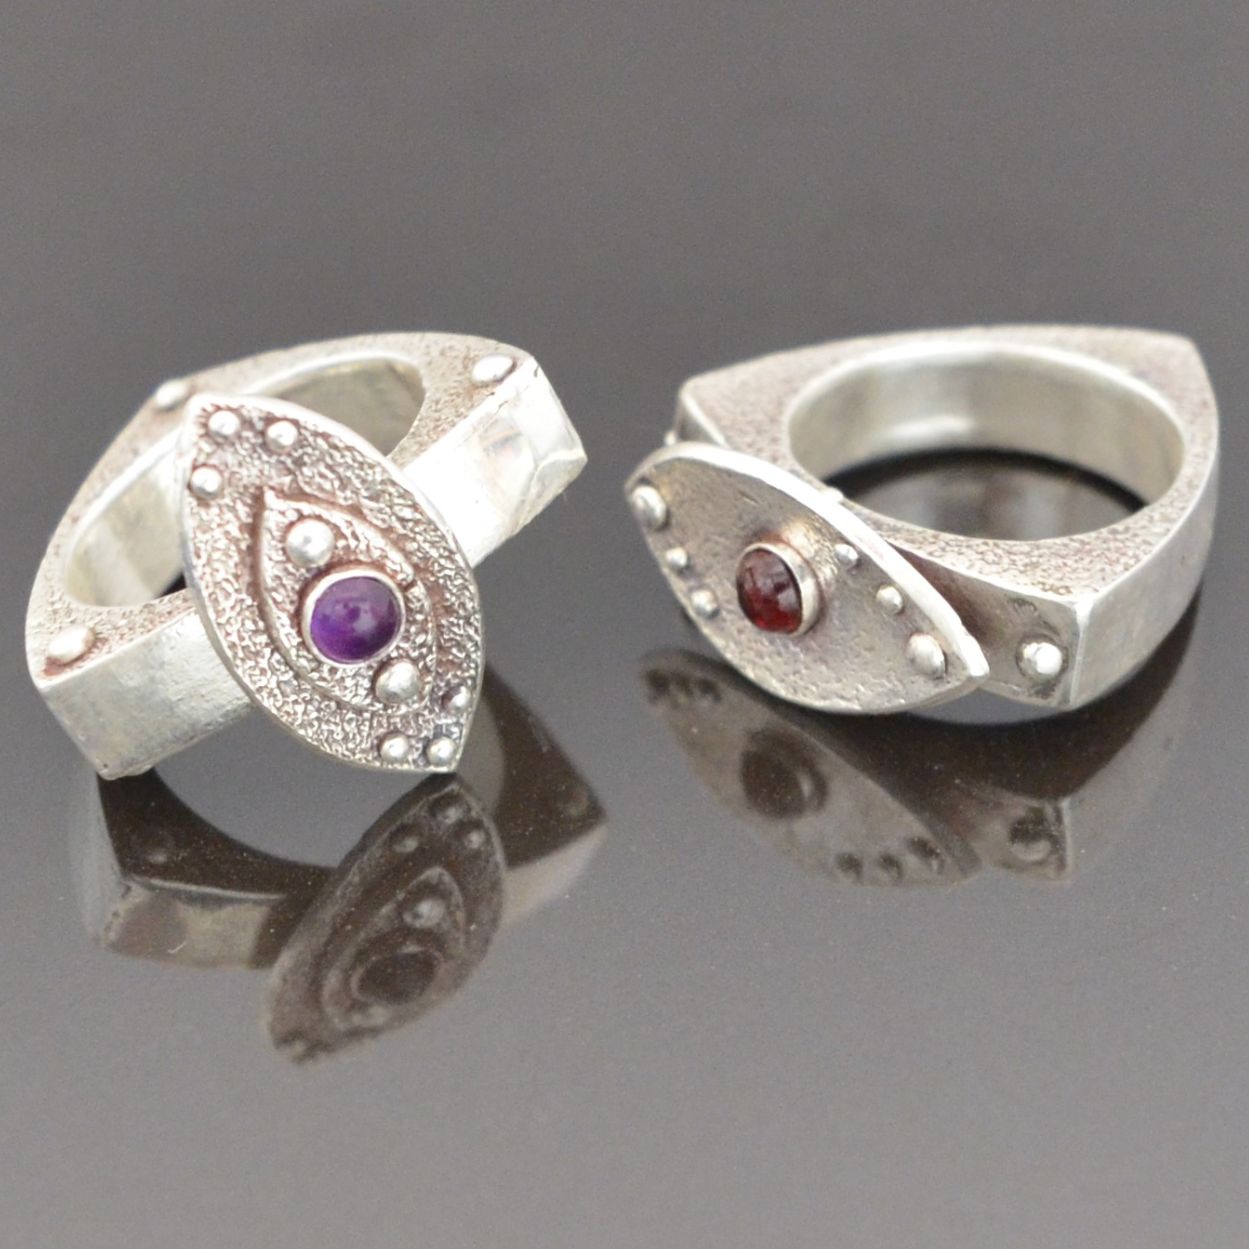 Infinity Rings by Tracey Spurgin of Craftworx Jewellery Workshops